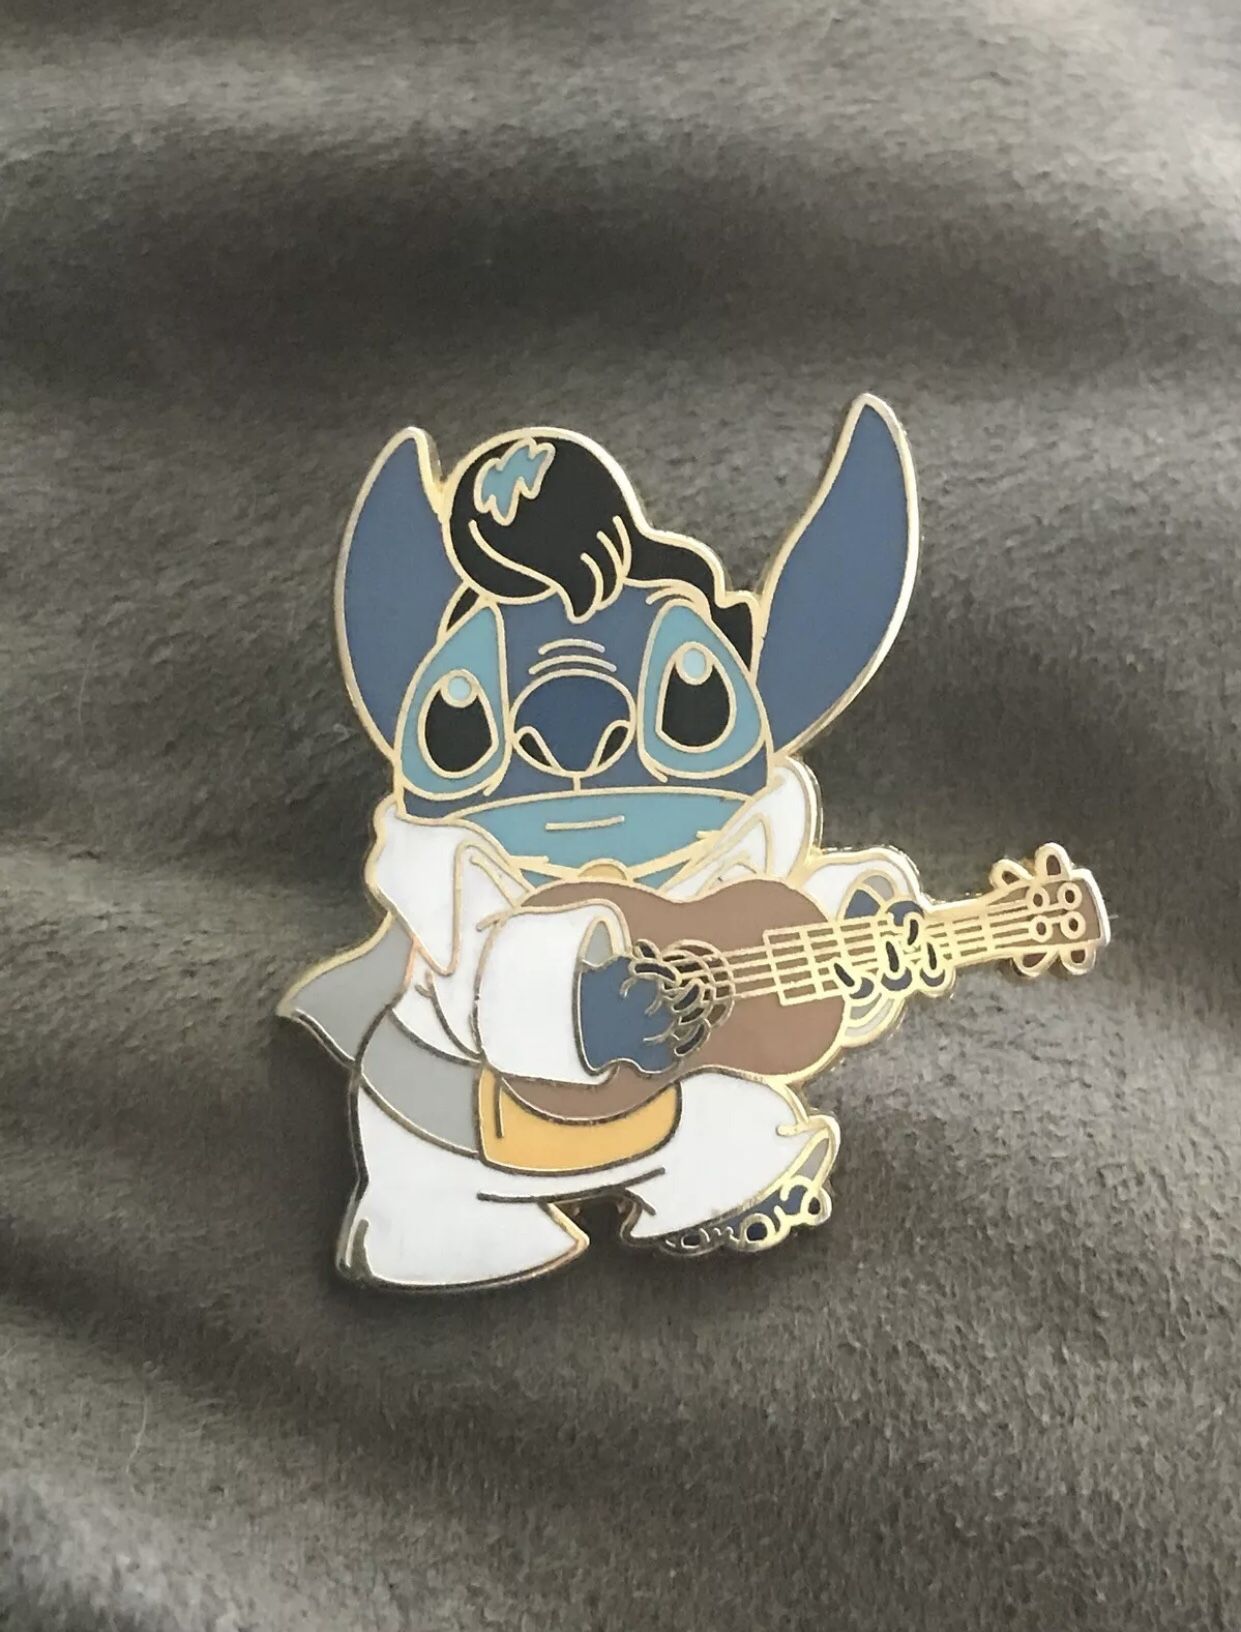 Lilo & STITCH All Shook Up as ELVIS with GUITAR Disney 2003 Pin